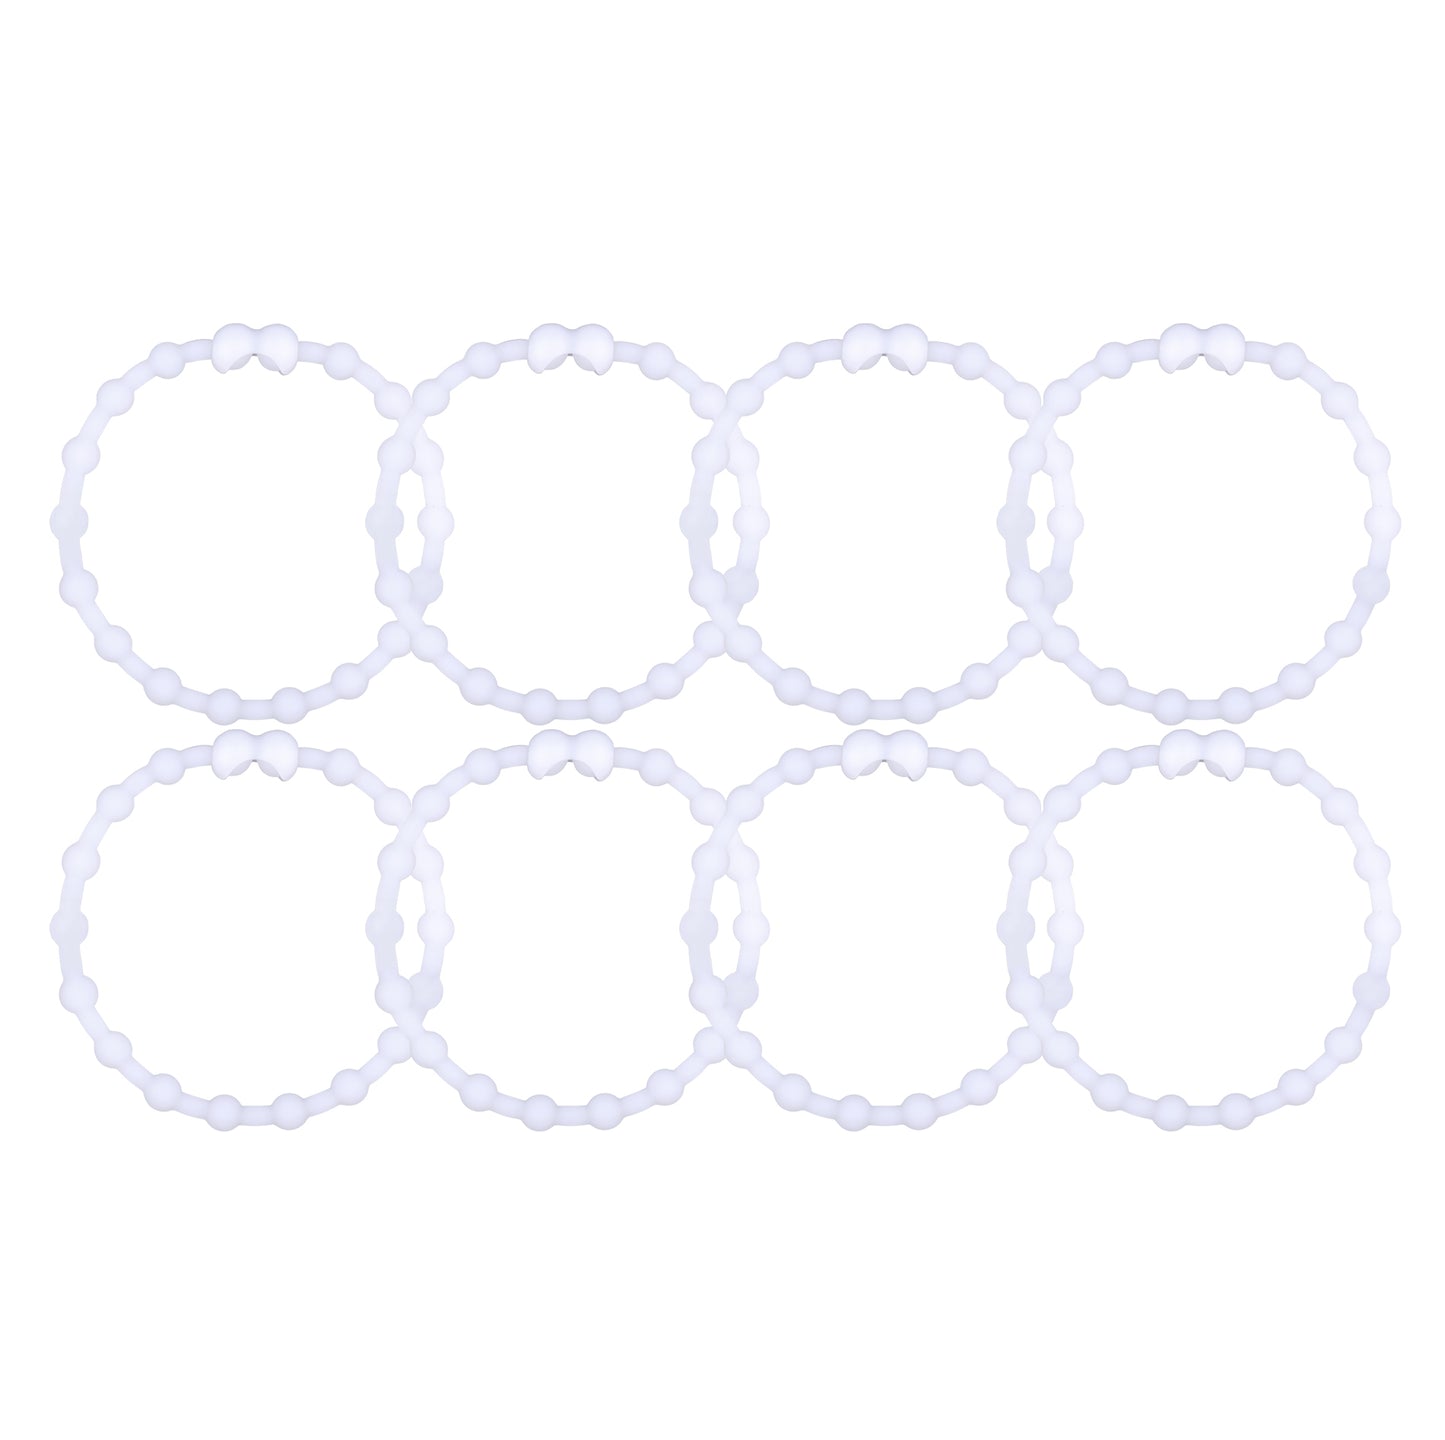 Glow White Hair Ties (8 Pack): Light Up Your Look with Sophisticated Shine